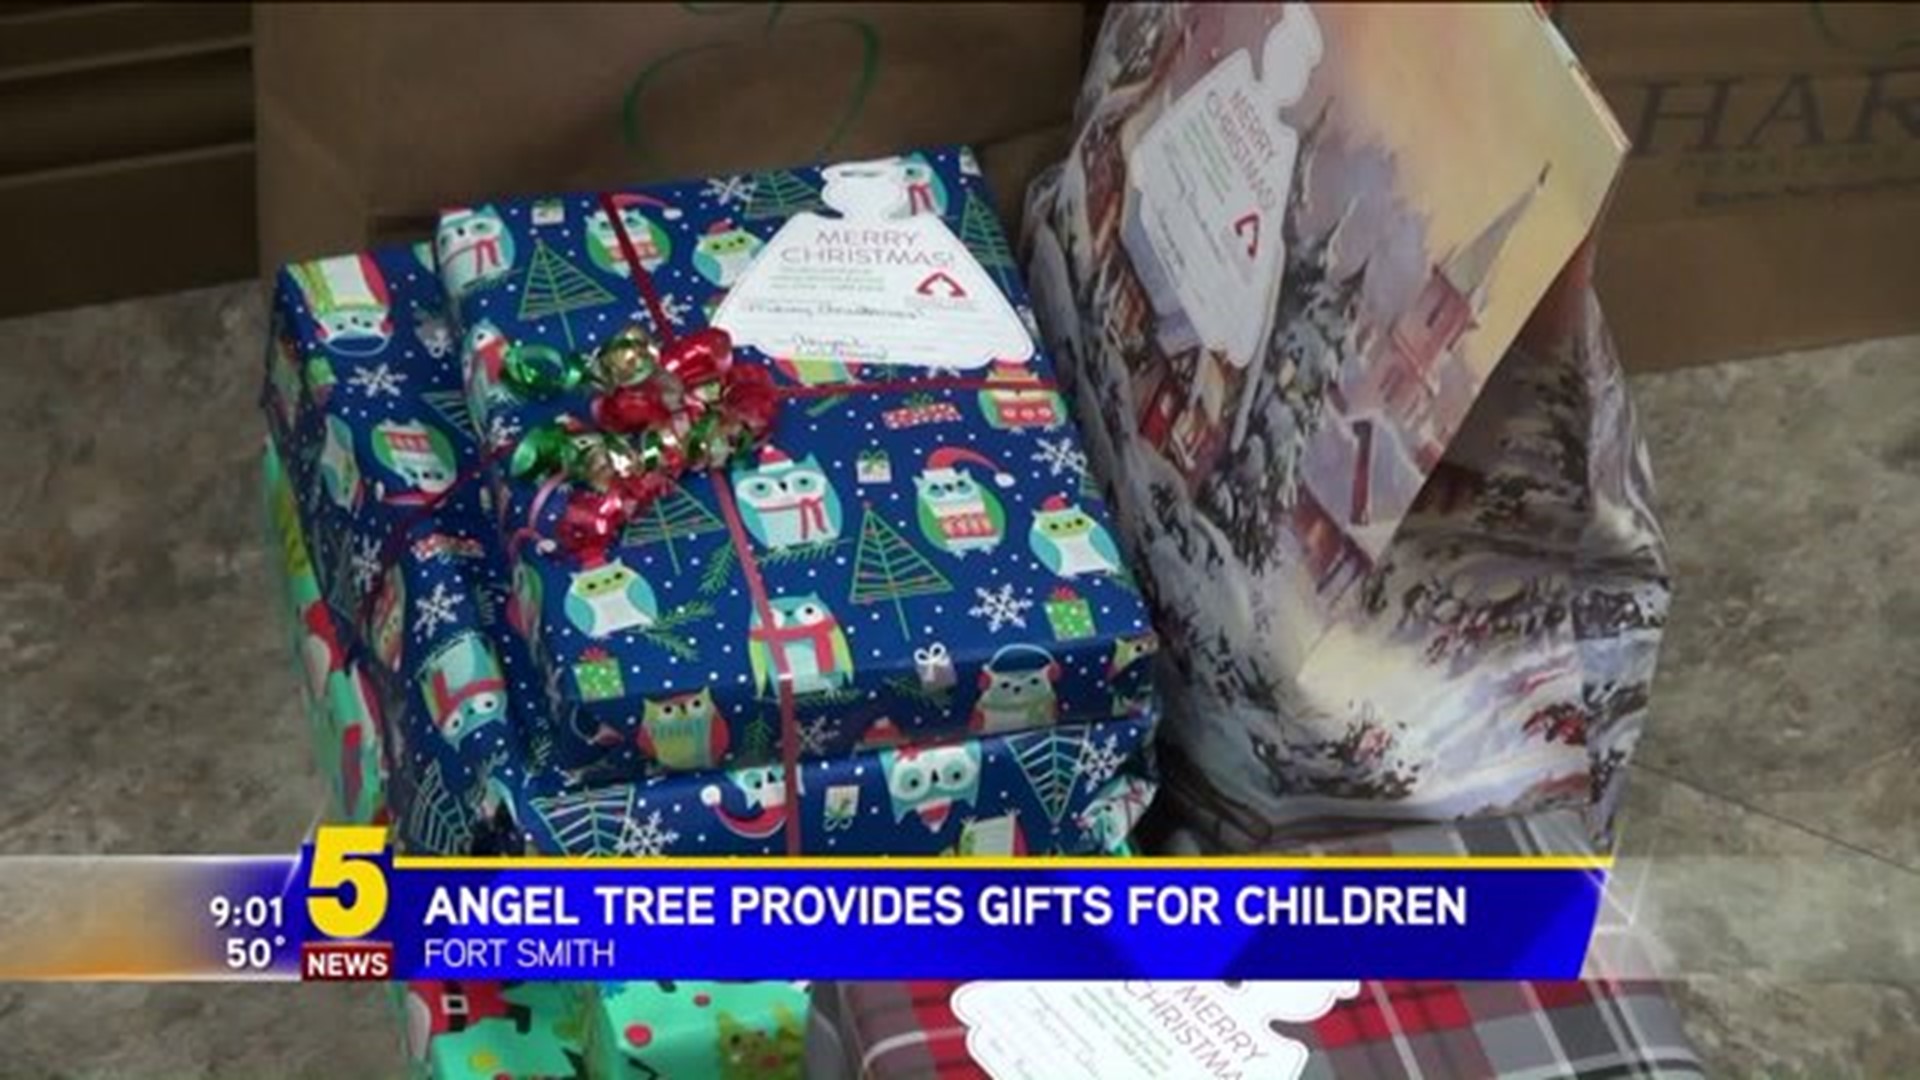 Angel Tree Provides Gifts For Children